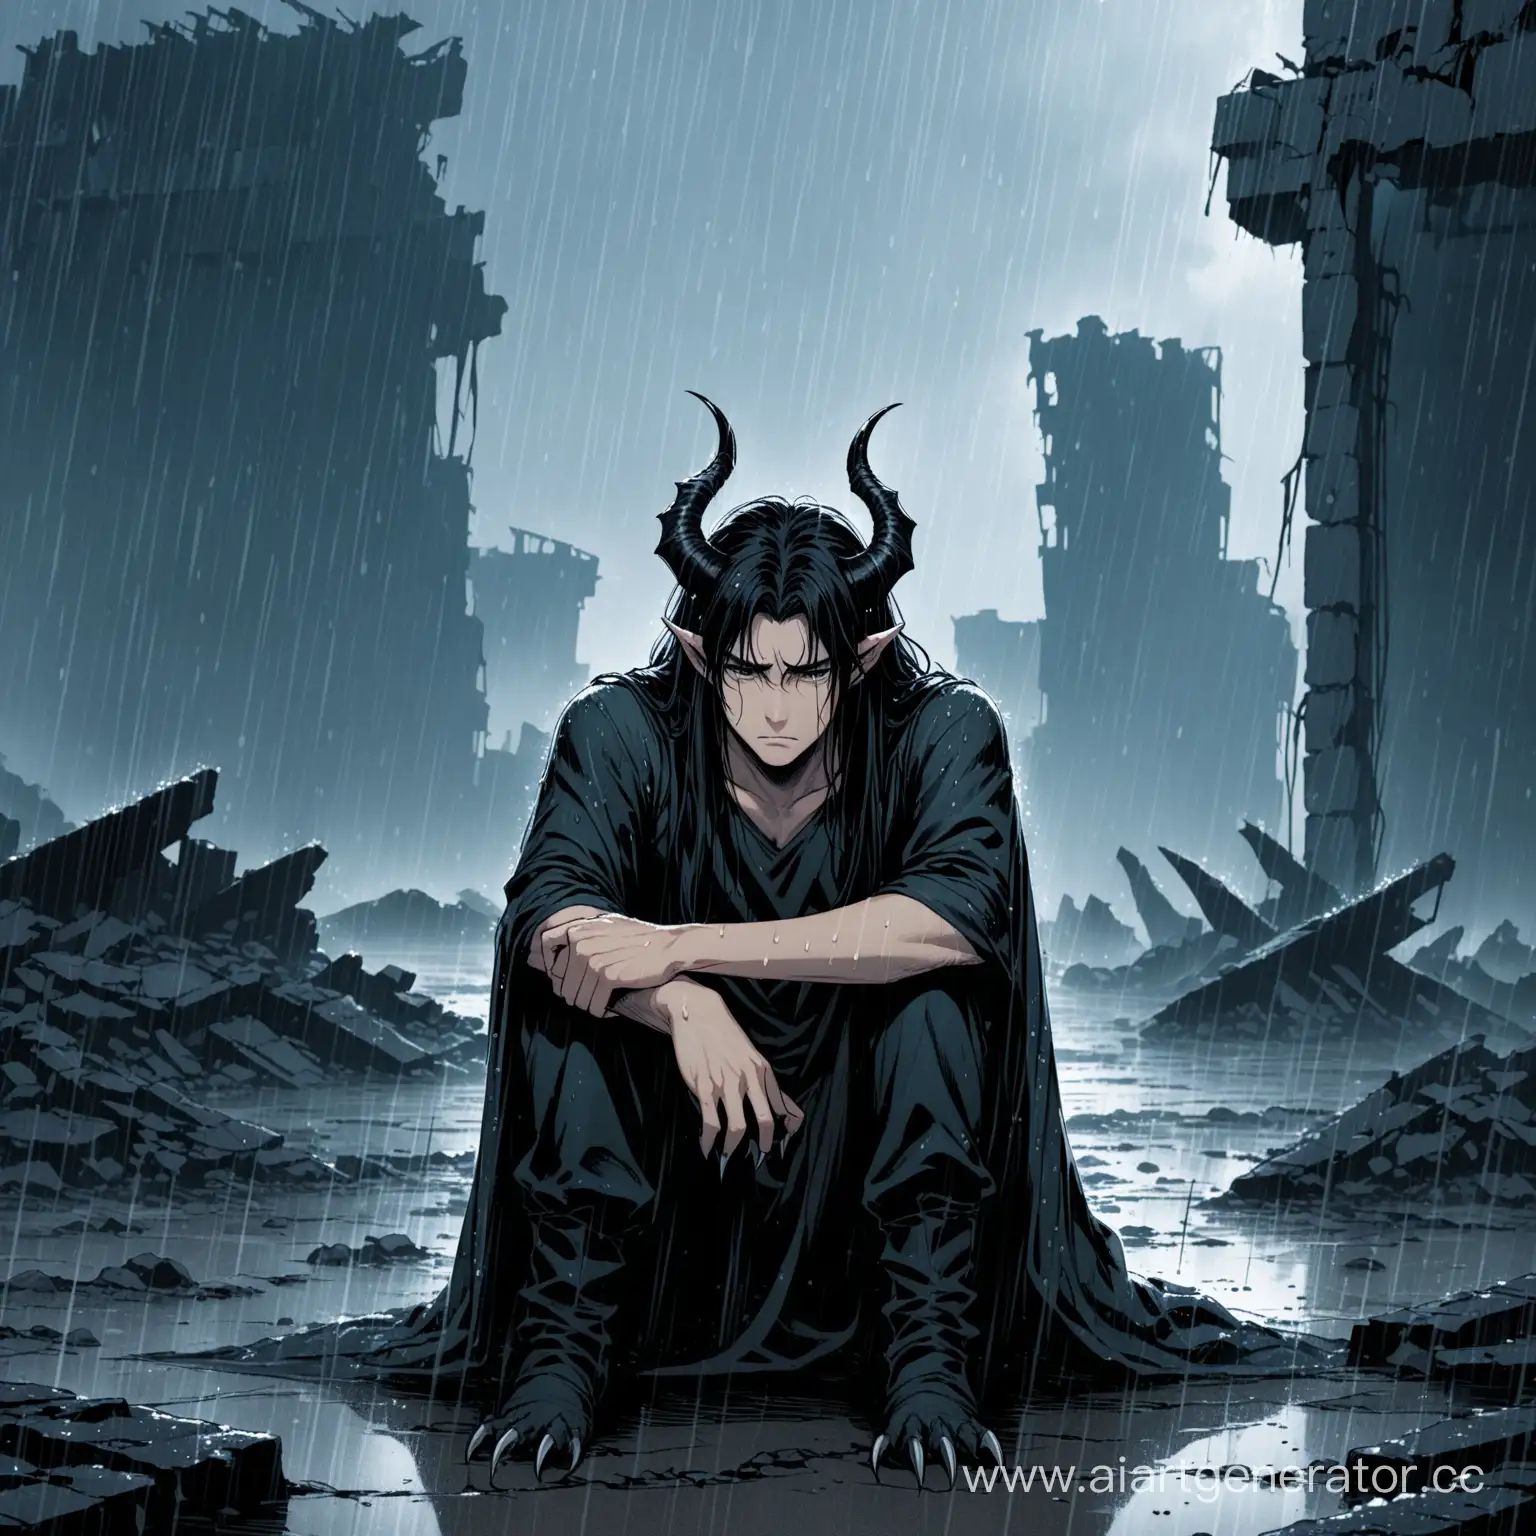 Brooding-Demon-Amidst-Ruins-in-the-Rain